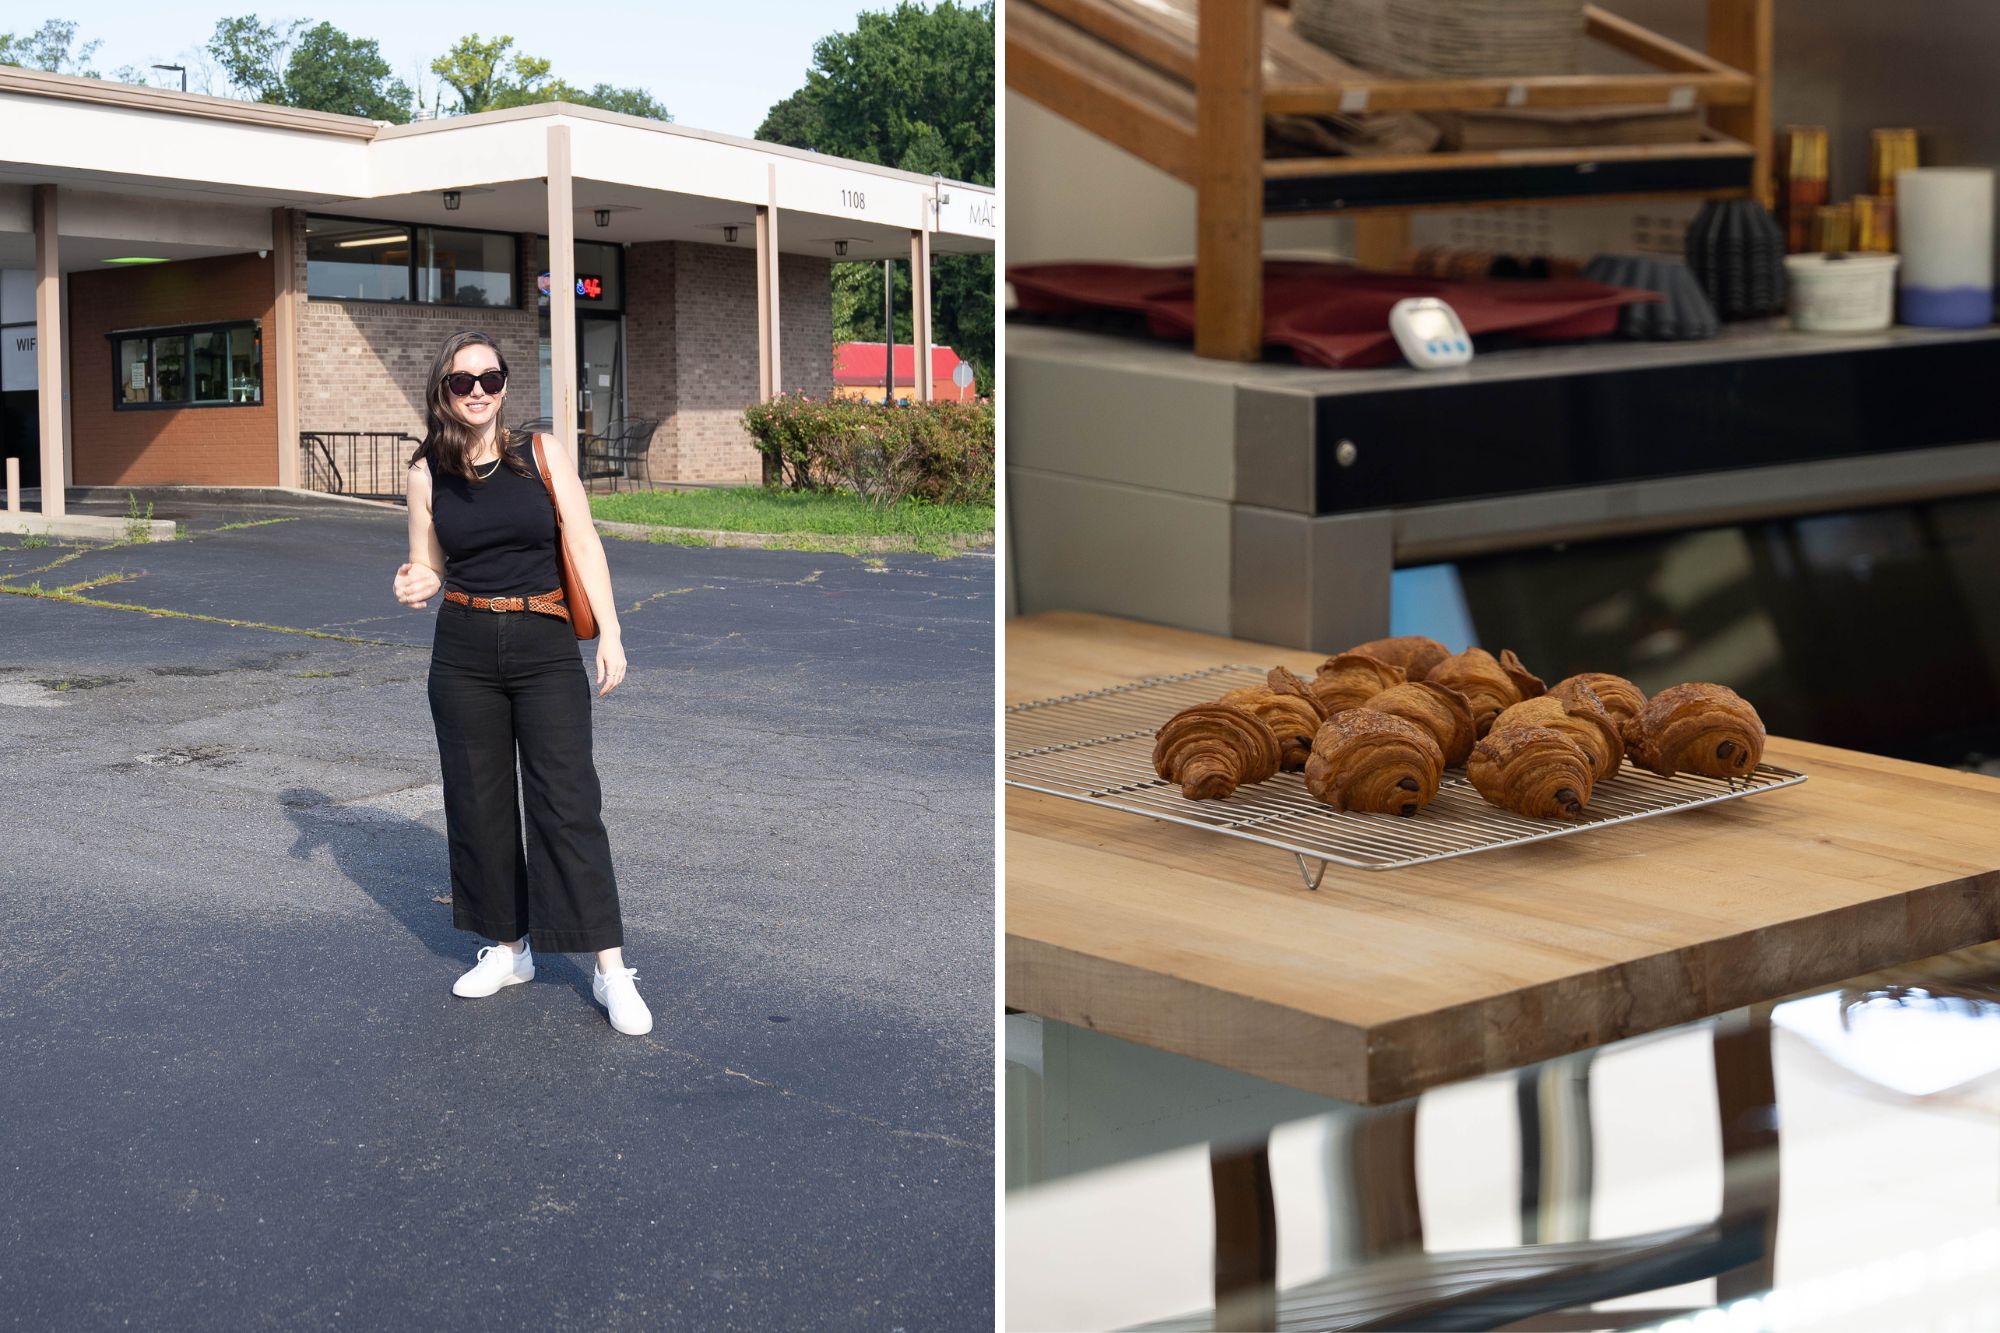 Two images: Alyssa stands in front of Mado Bakery | Croissants cooling on a rack